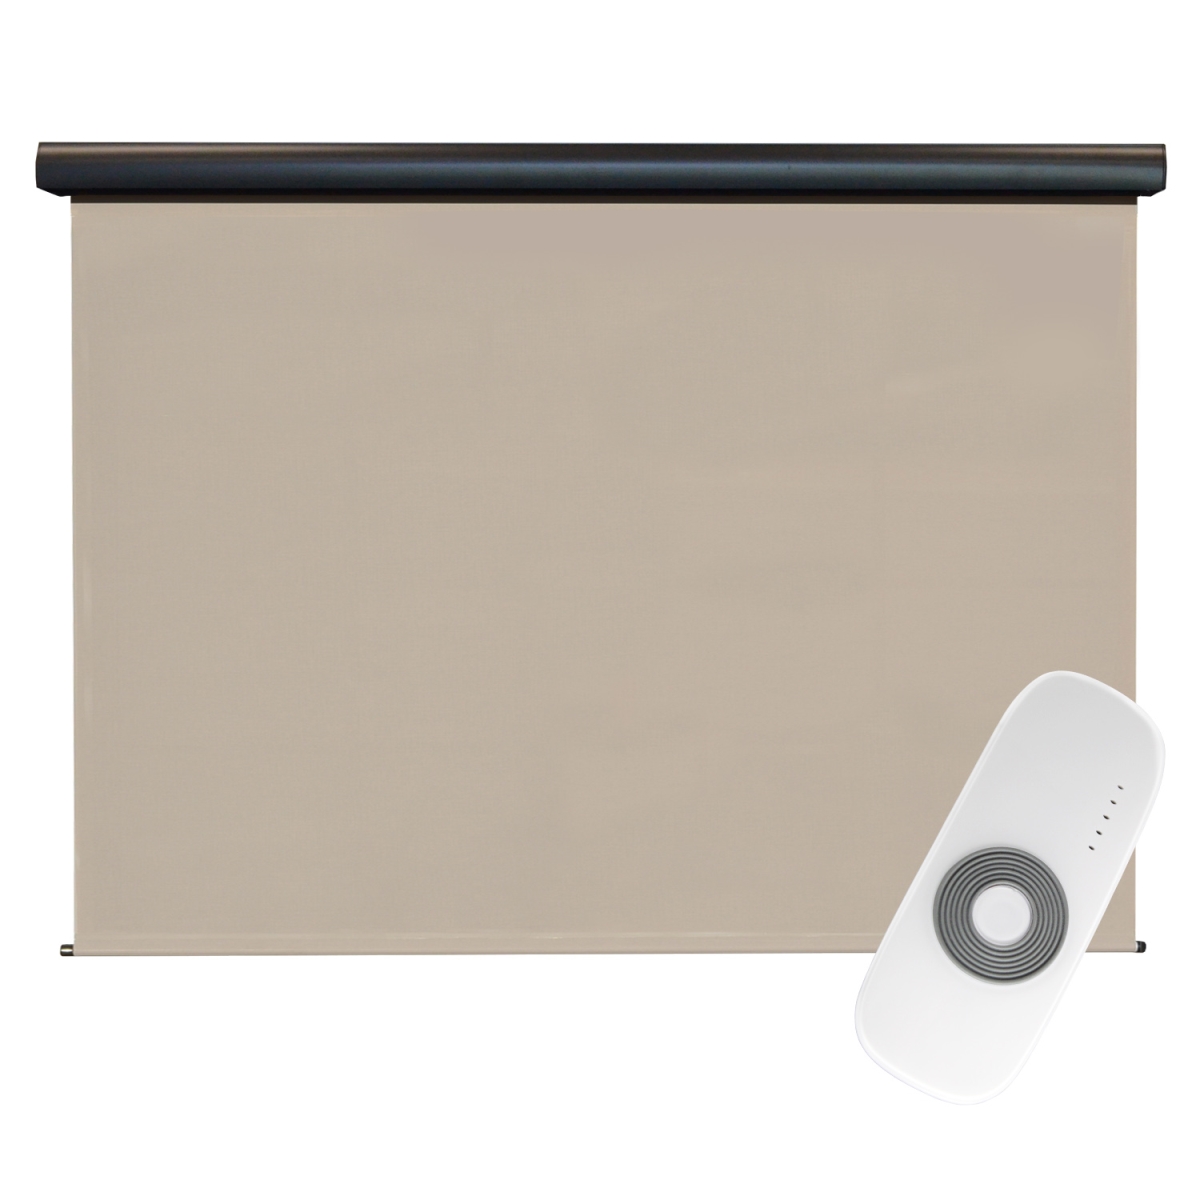 O80.78.80 7 X 8 Ft. Regal Rechargeable Motorized Outdoor Sun Shade With Protective Valance - Maple White